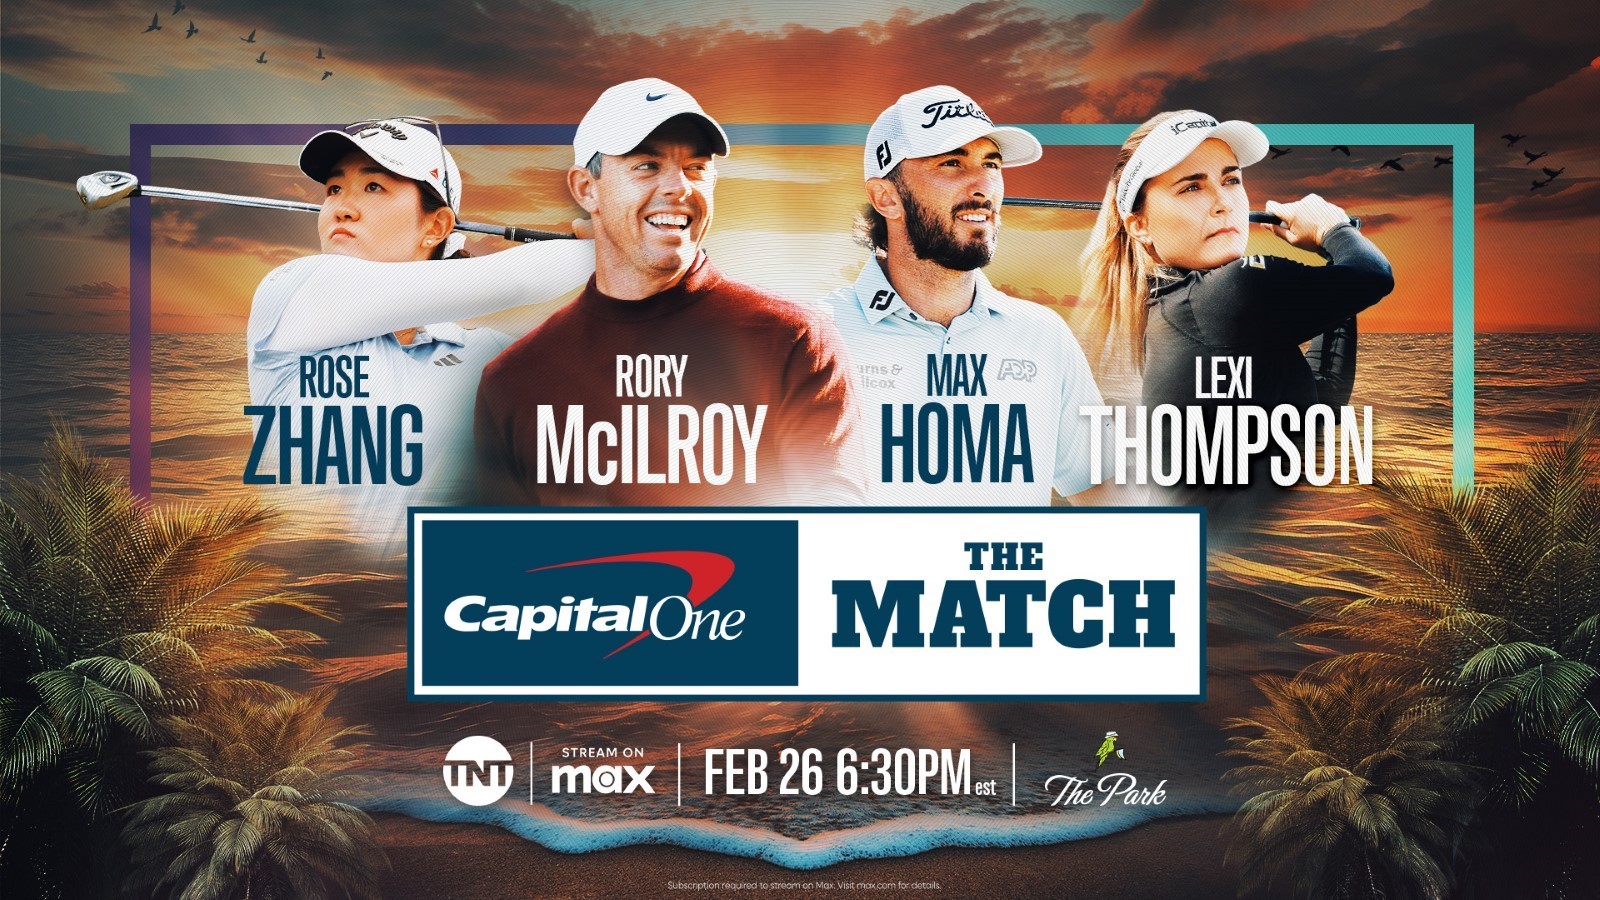 Rose Zhang, Lexi Thompson to star alongside Rory McIlroy and Max Homa